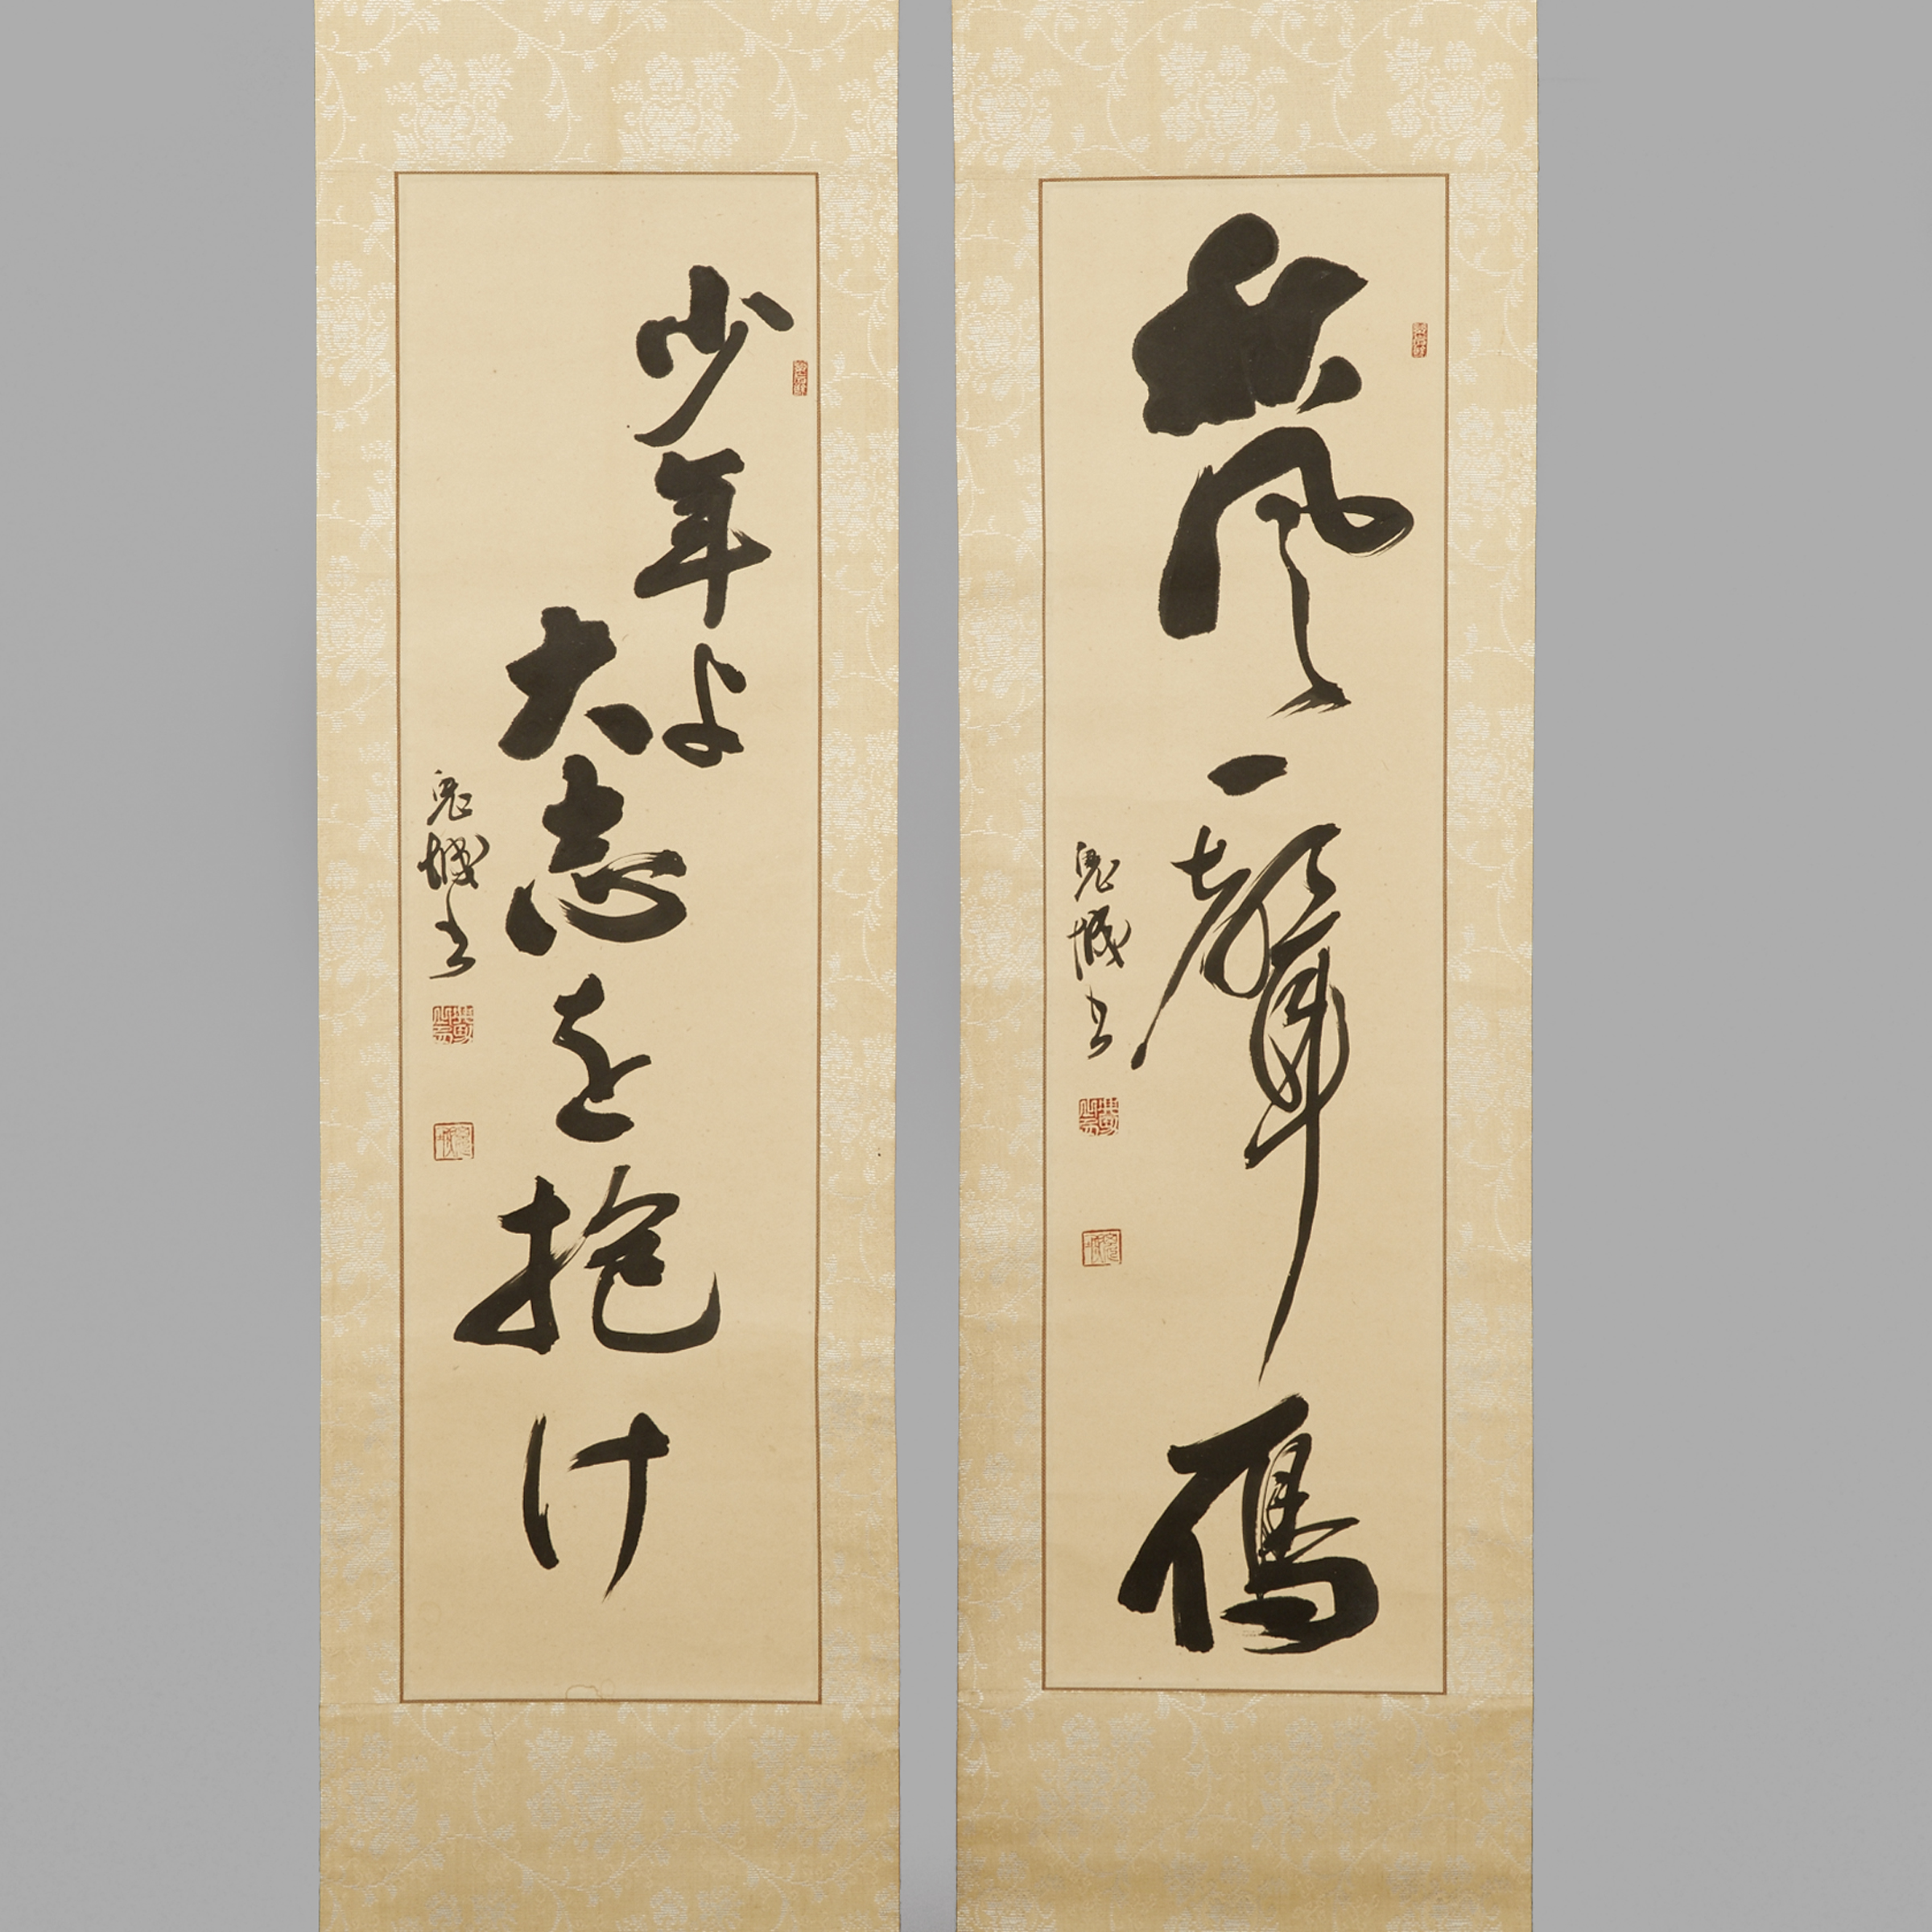 A Japanese Calligraphy Couplet